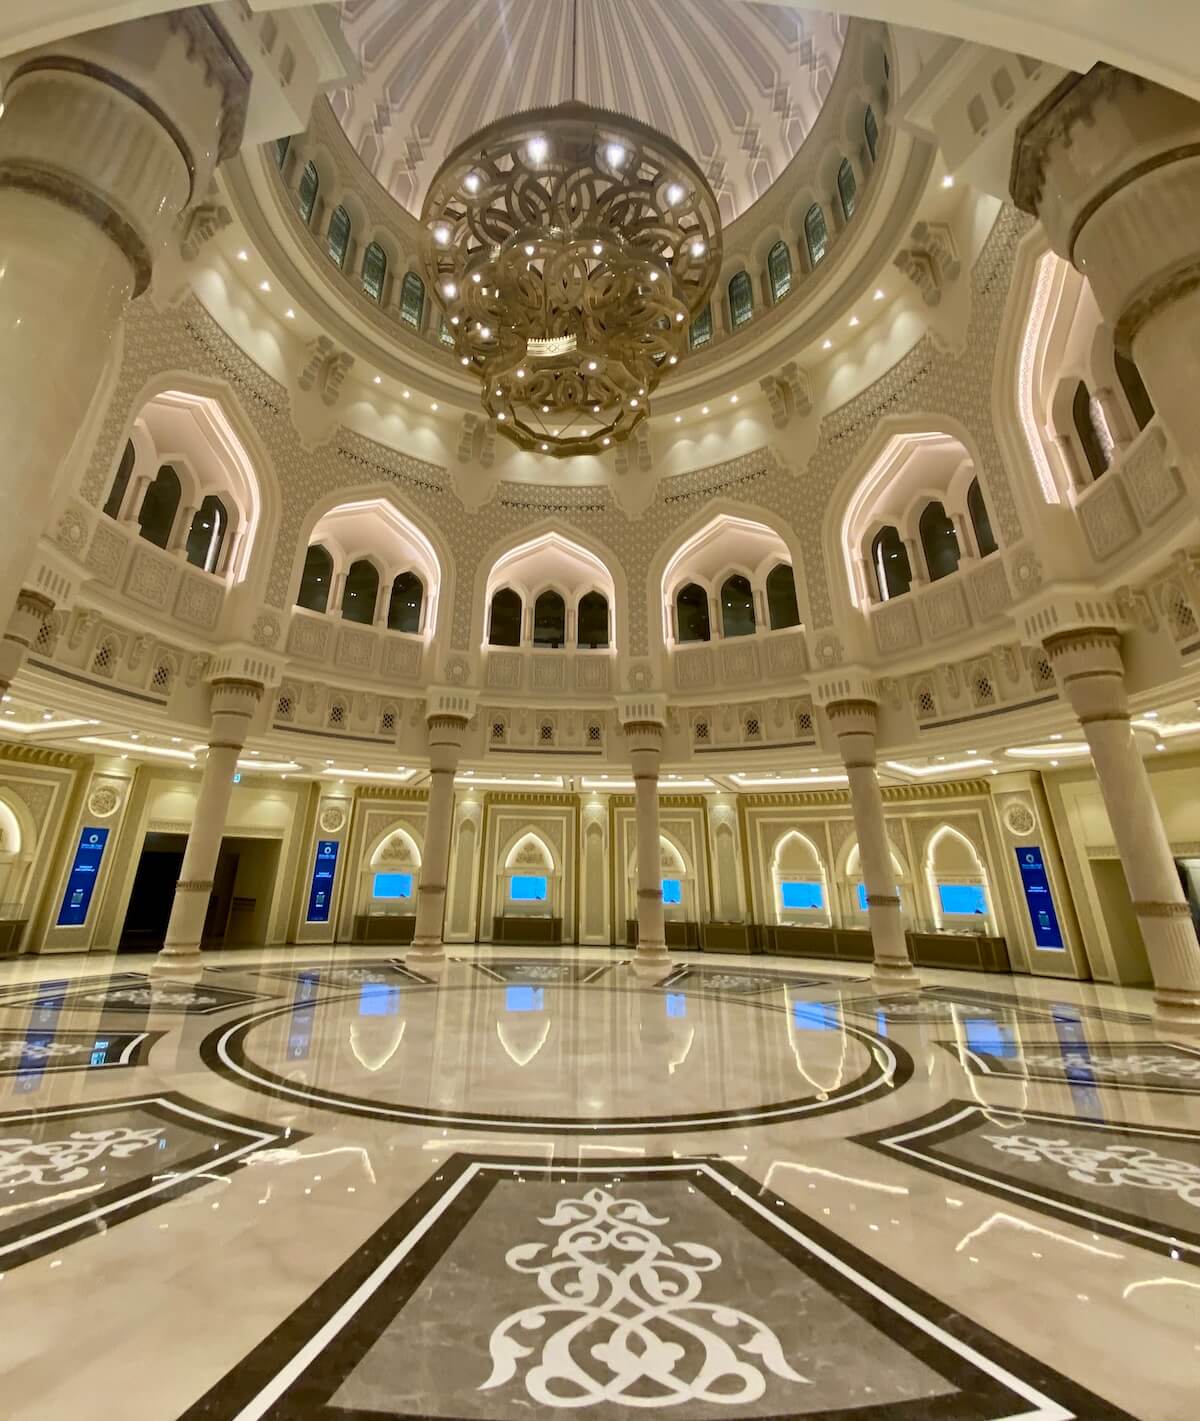 Hall of at Holy Quran museum Sharjah UAE